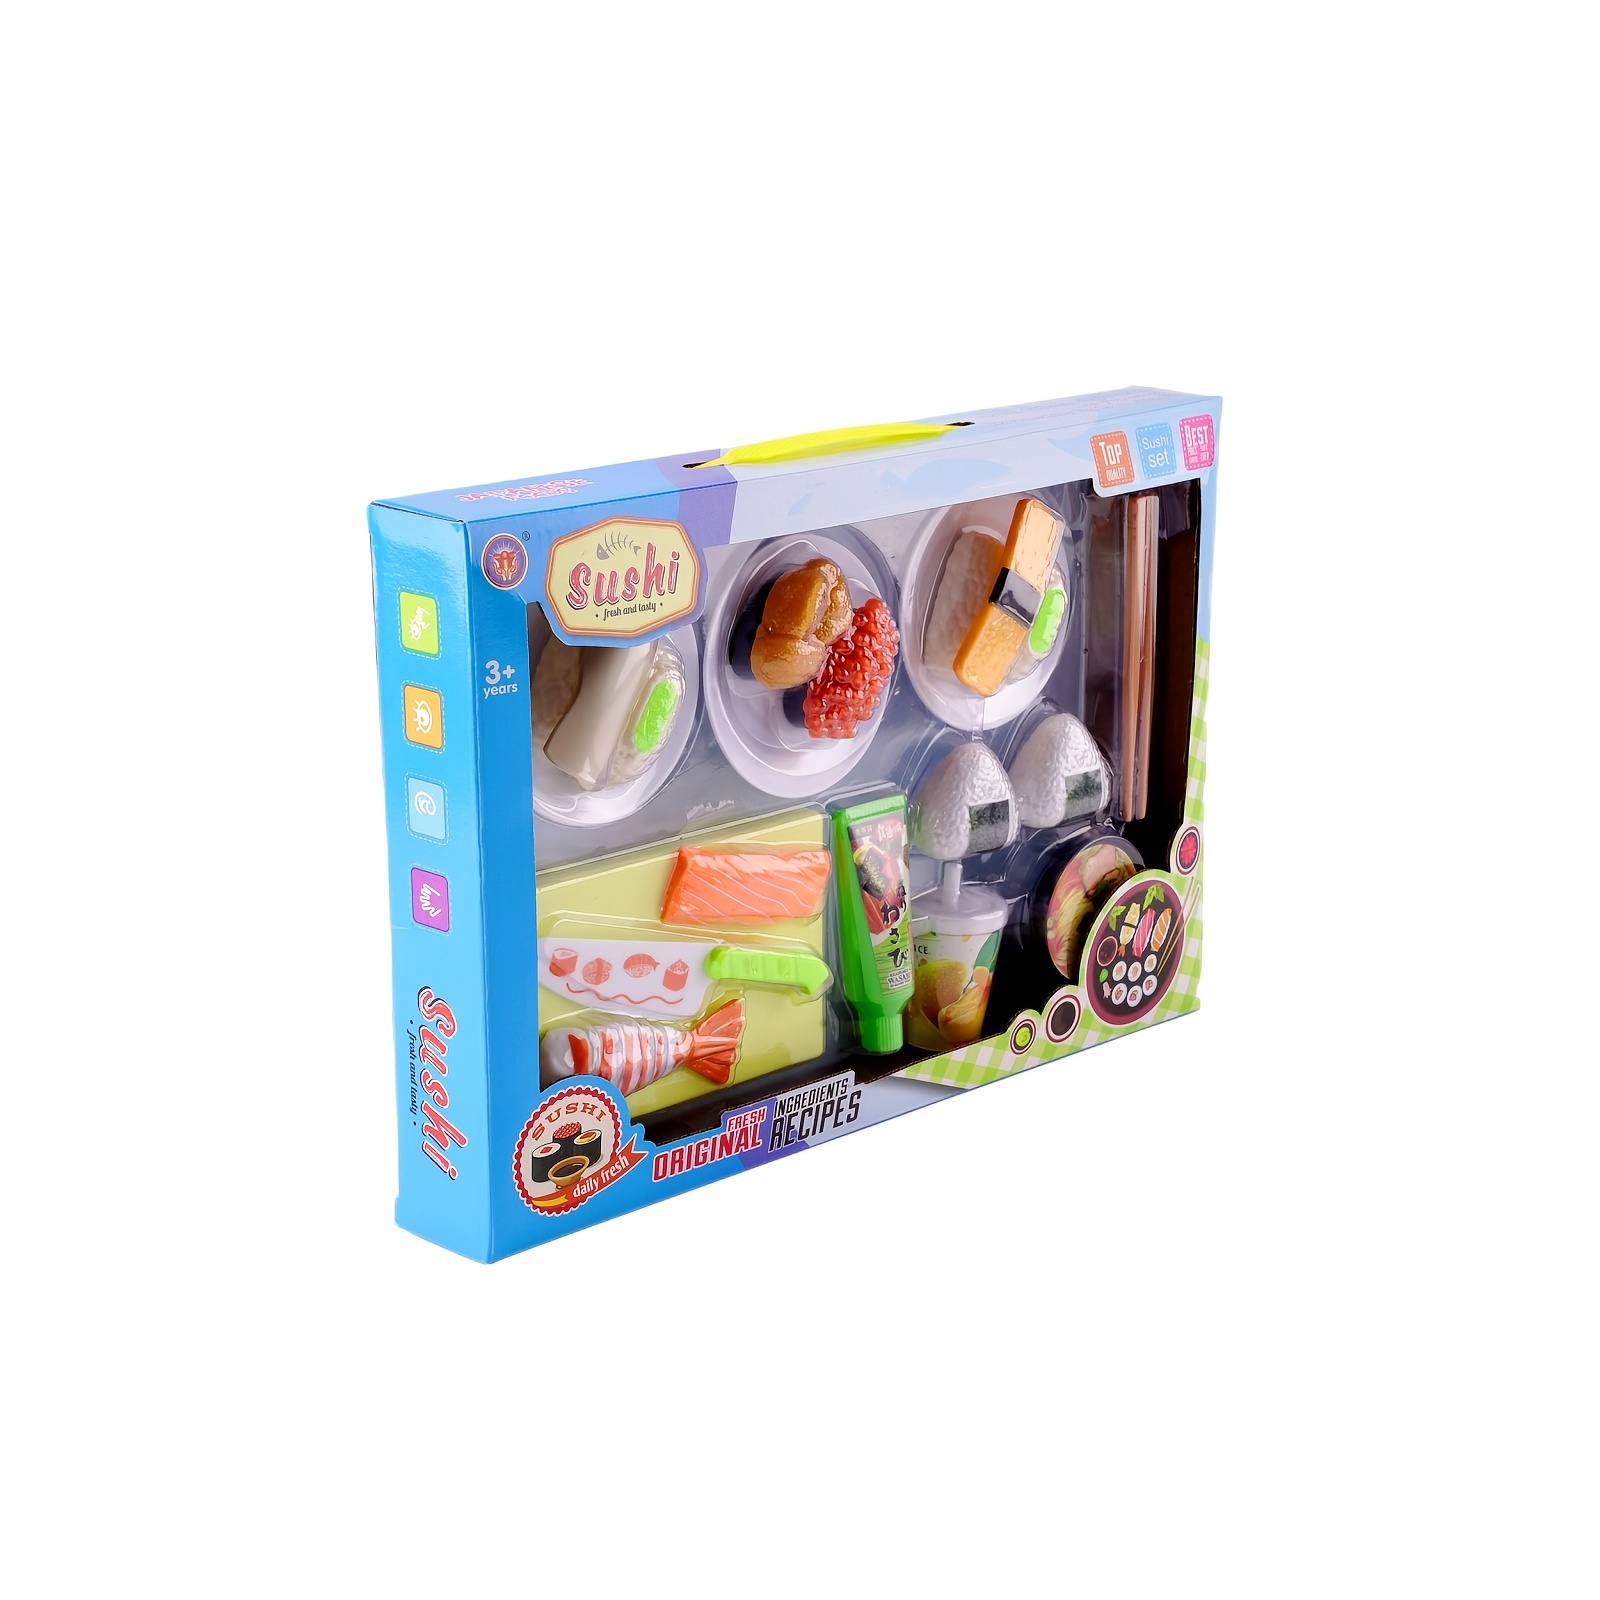 Children Kitchen Toys Set Simulation Early Educational Toy